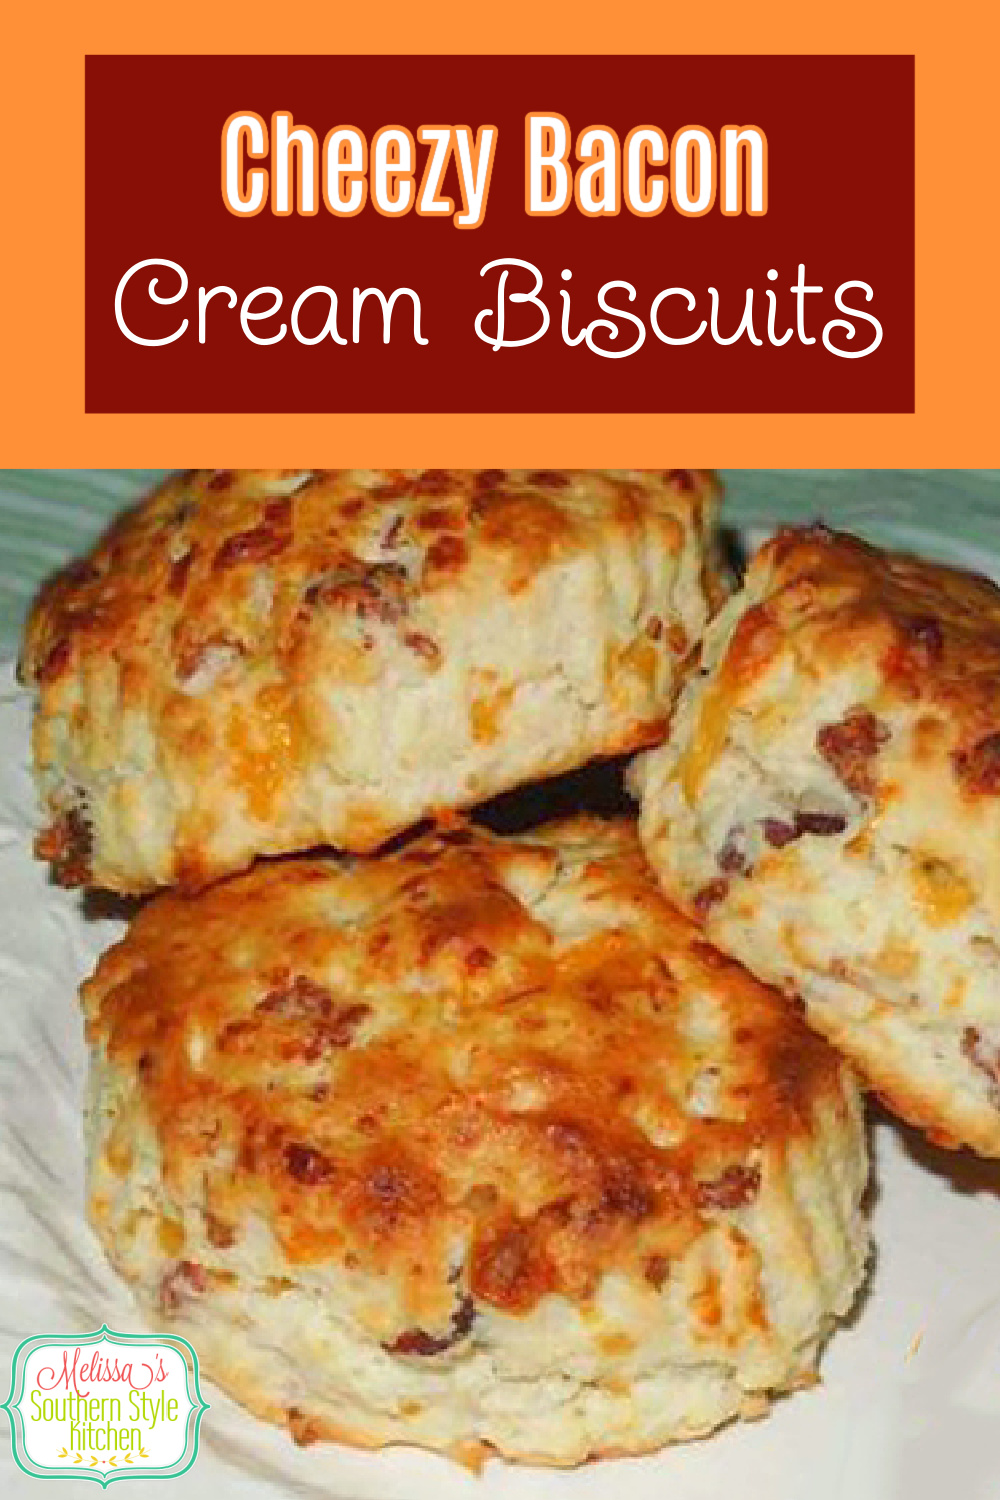 Cheezy Bacon Cream Biscuits are a tasty start to any day #biscuits #bacon #easybiscuitrecipes #brunch #breakfast #southernbiscuits #southernfood #southernrecipes #melissassouthernstylekitchen via @melissasssk